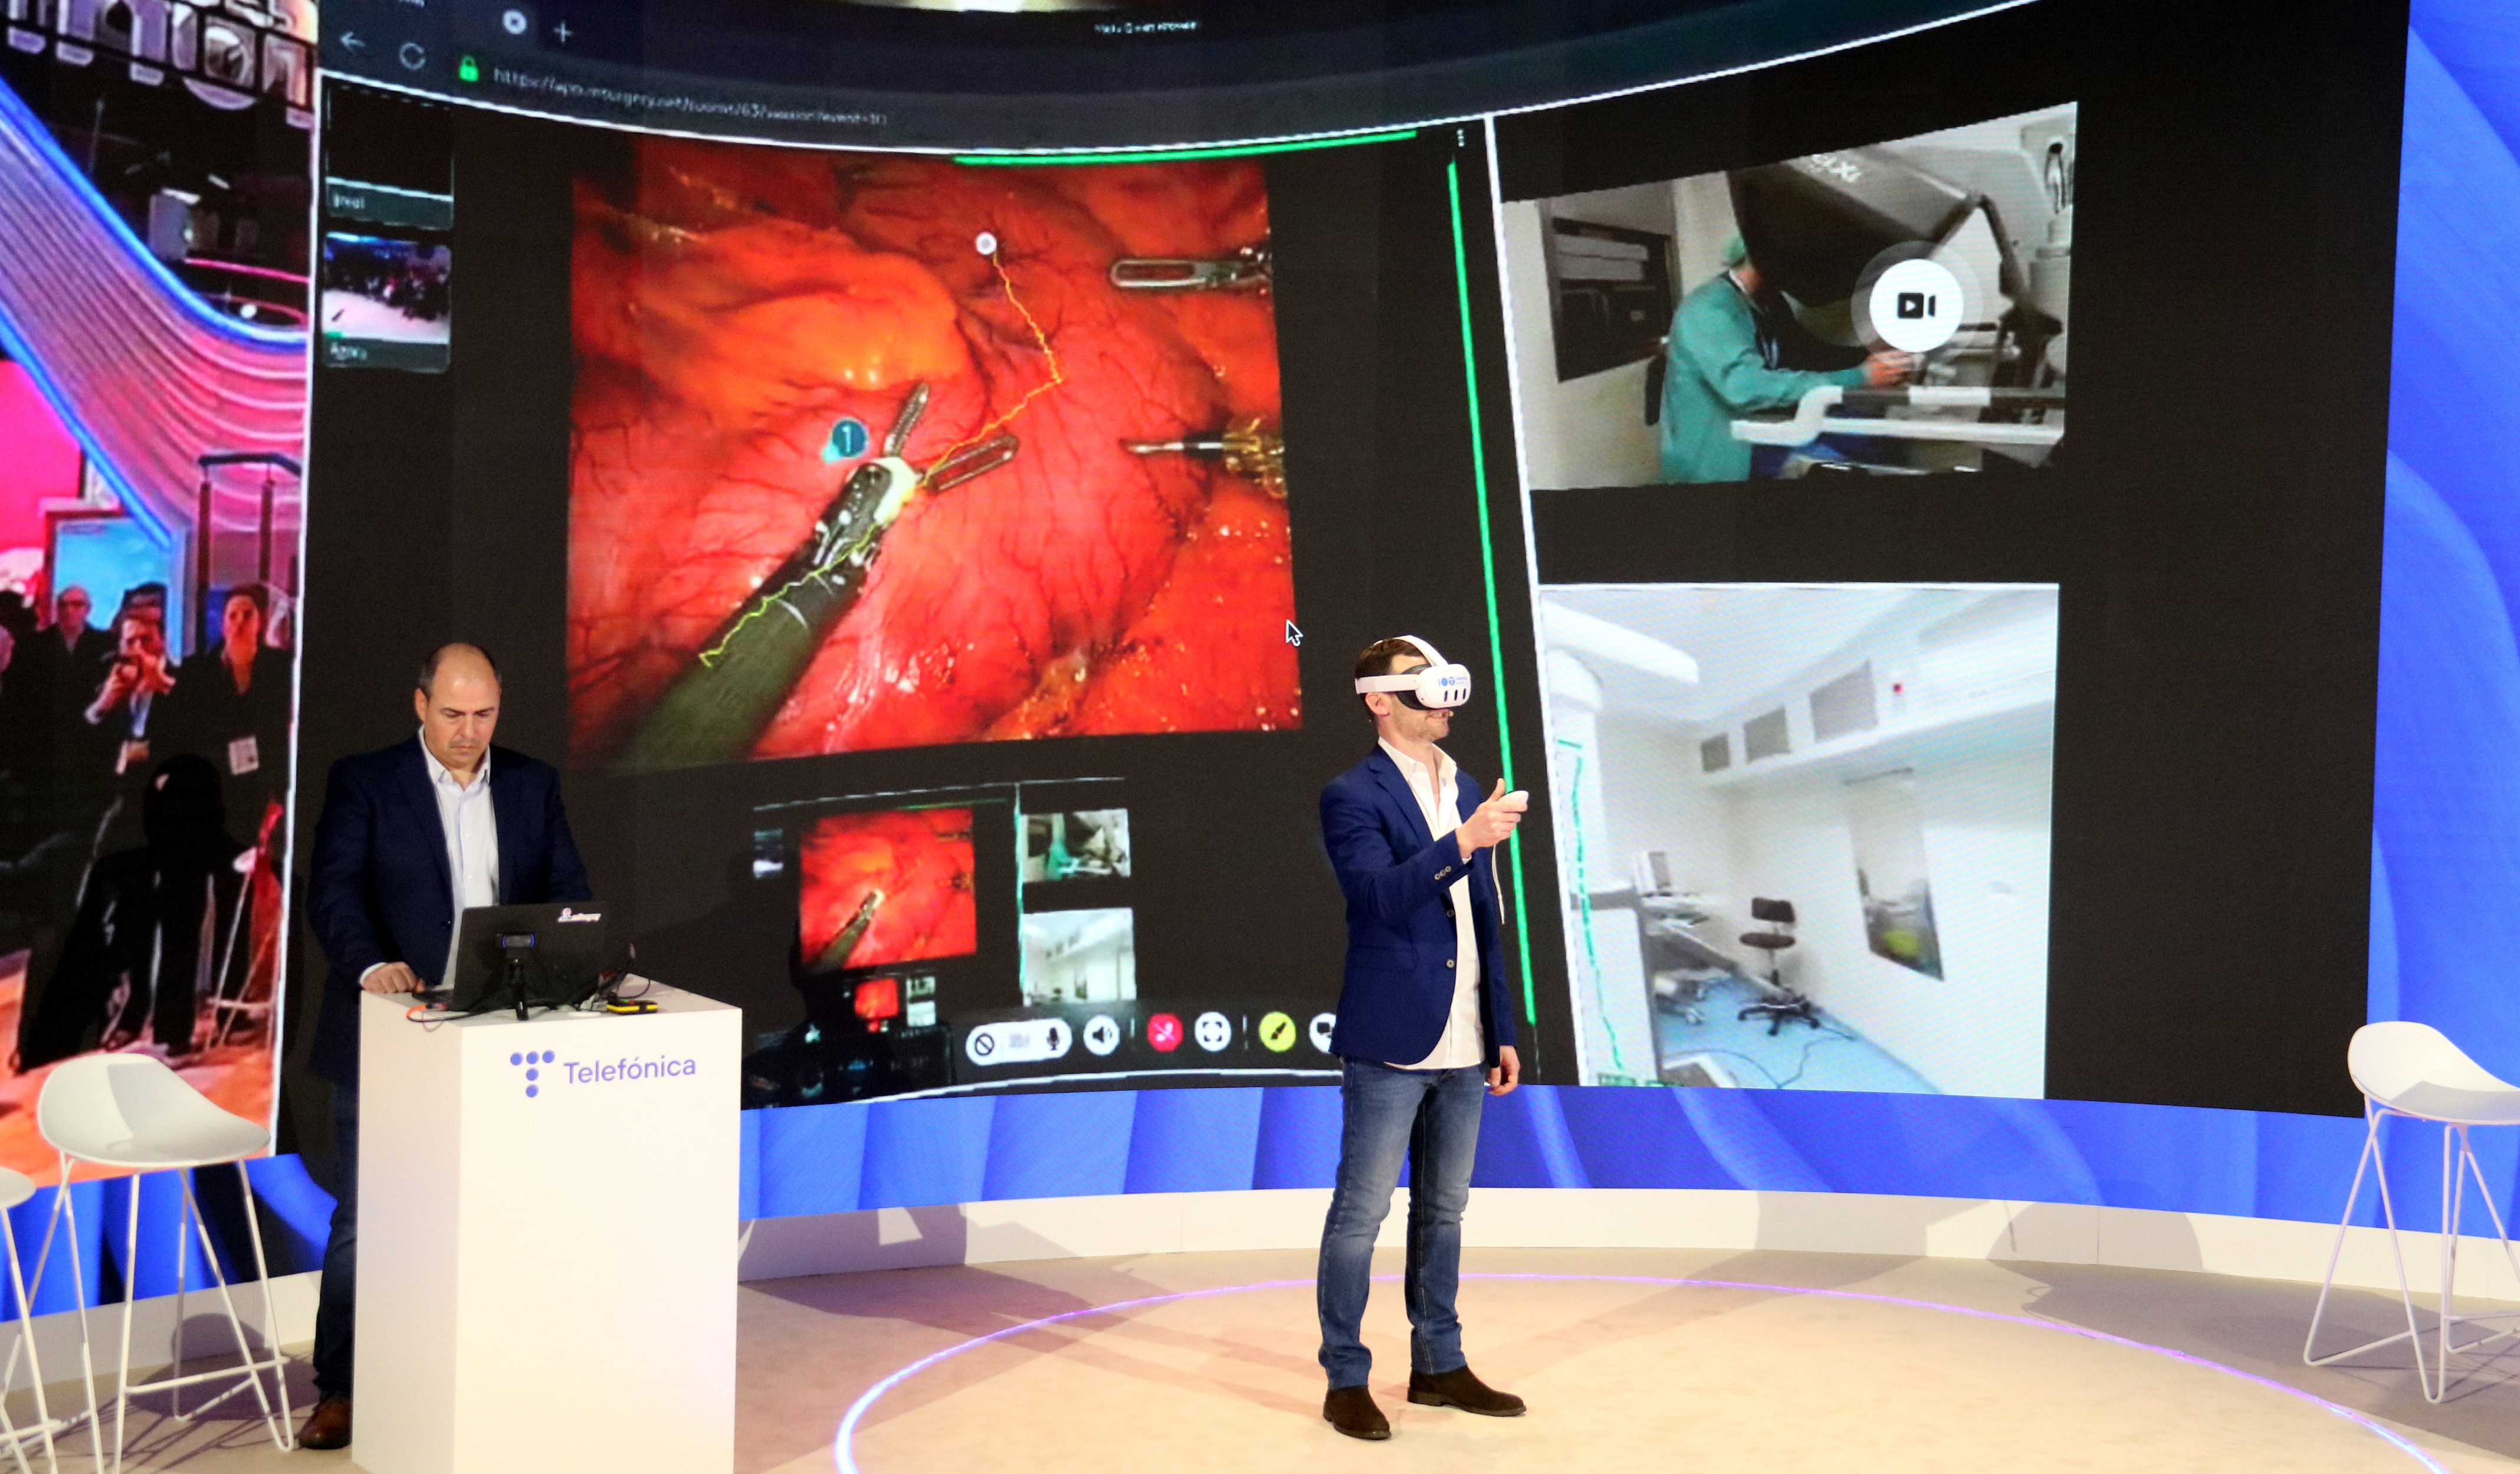 Doctor Jordi Tarascó shows off the VR headset that can train surgeons at the Mobile World Congress